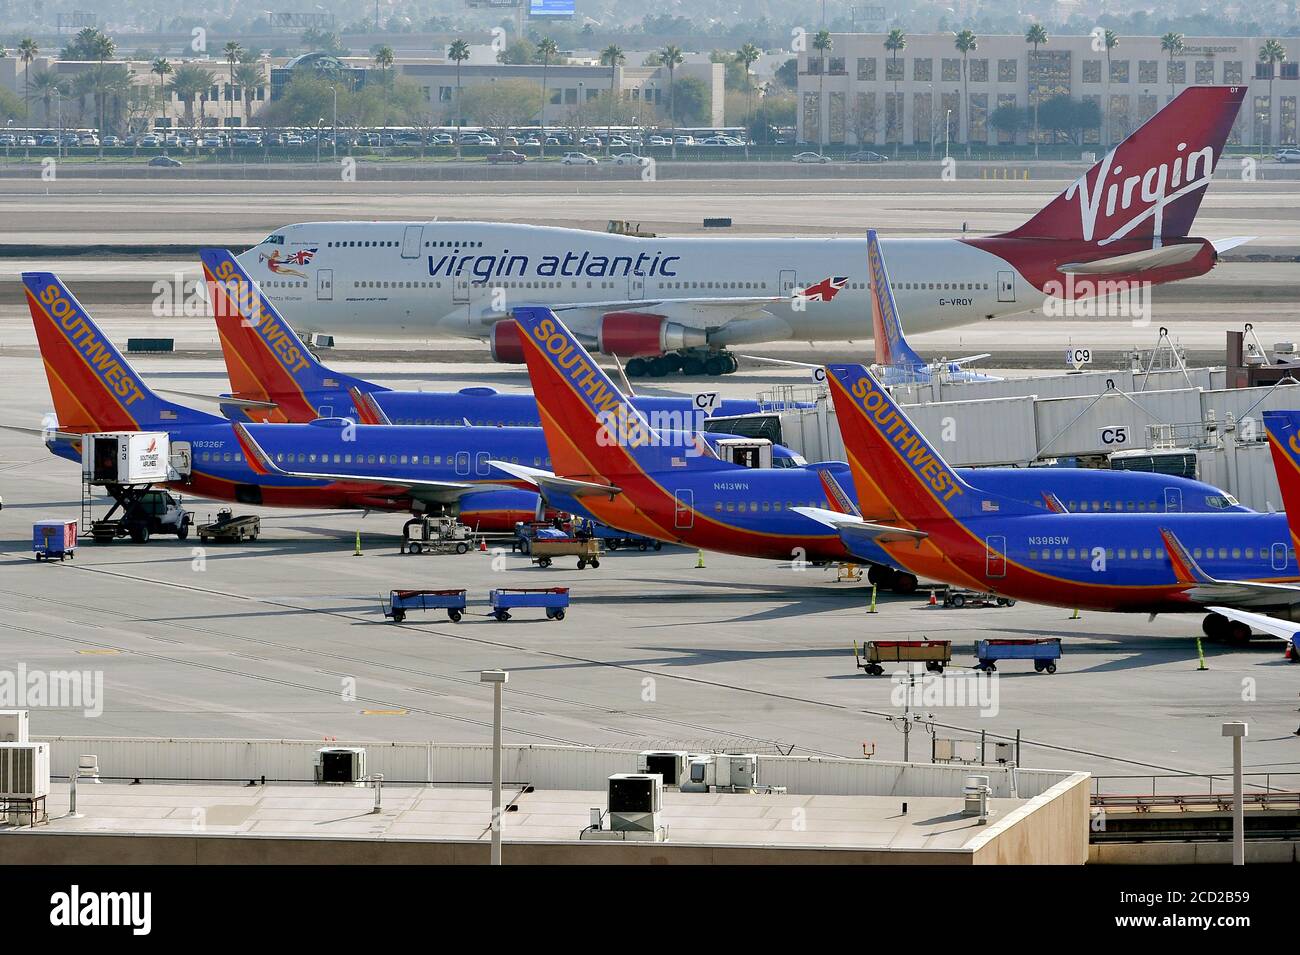 Las Vegas, Nevada, USA. 12th Jan, 2015. A Virgin Atlantic passenger aircraft - Boeing 747 - taxis by Southwest Airline aircrafts at McCarran International Airport on January 12, 2015, in Las Vegas, Nevada. Credit: David Becker/ZUMA Wire/Alamy Live News Stock Photo